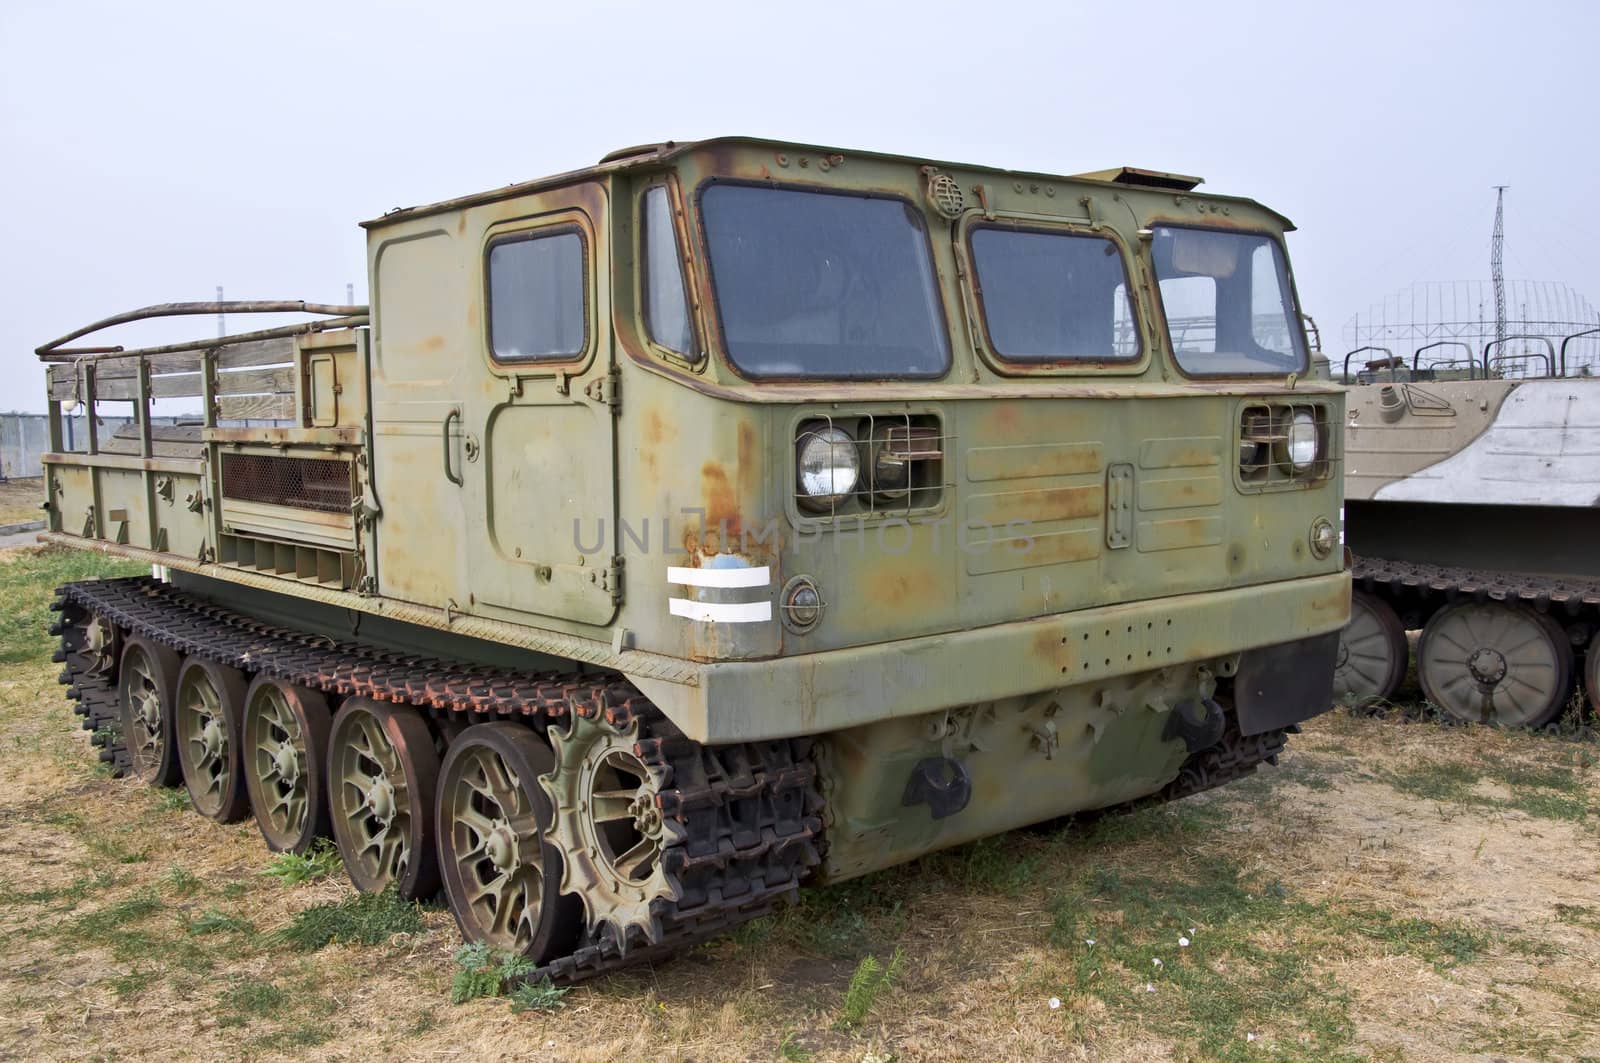 Old Army heavy all-terrain vehicle on tracks. Used to move goods and foot.